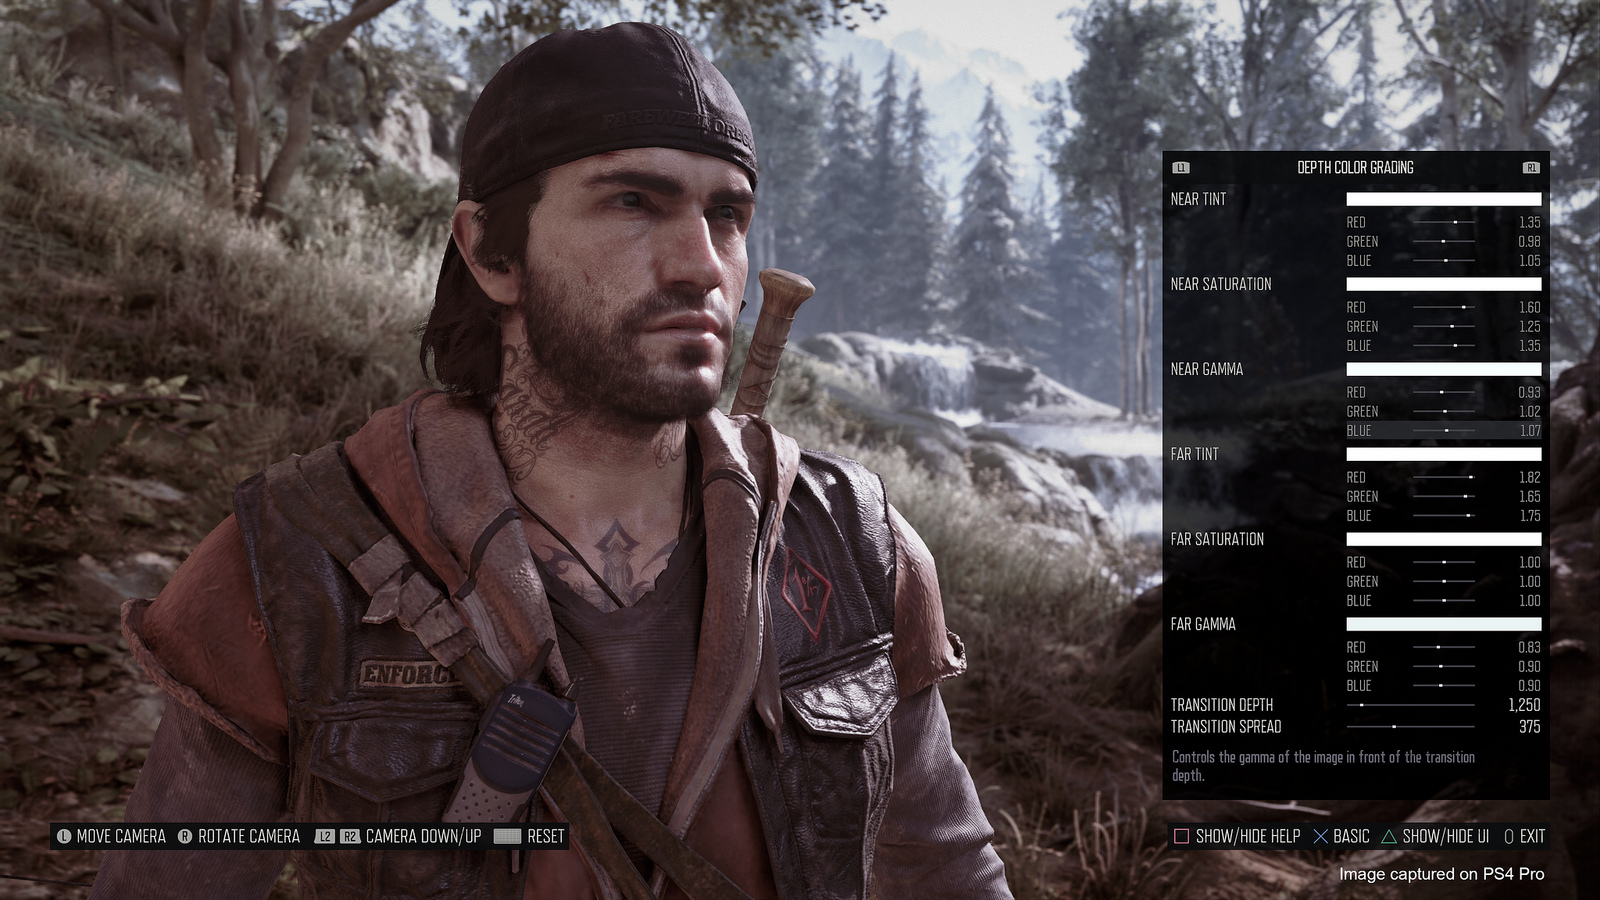 Days Gone review - a shallow copy of many better open-world action games